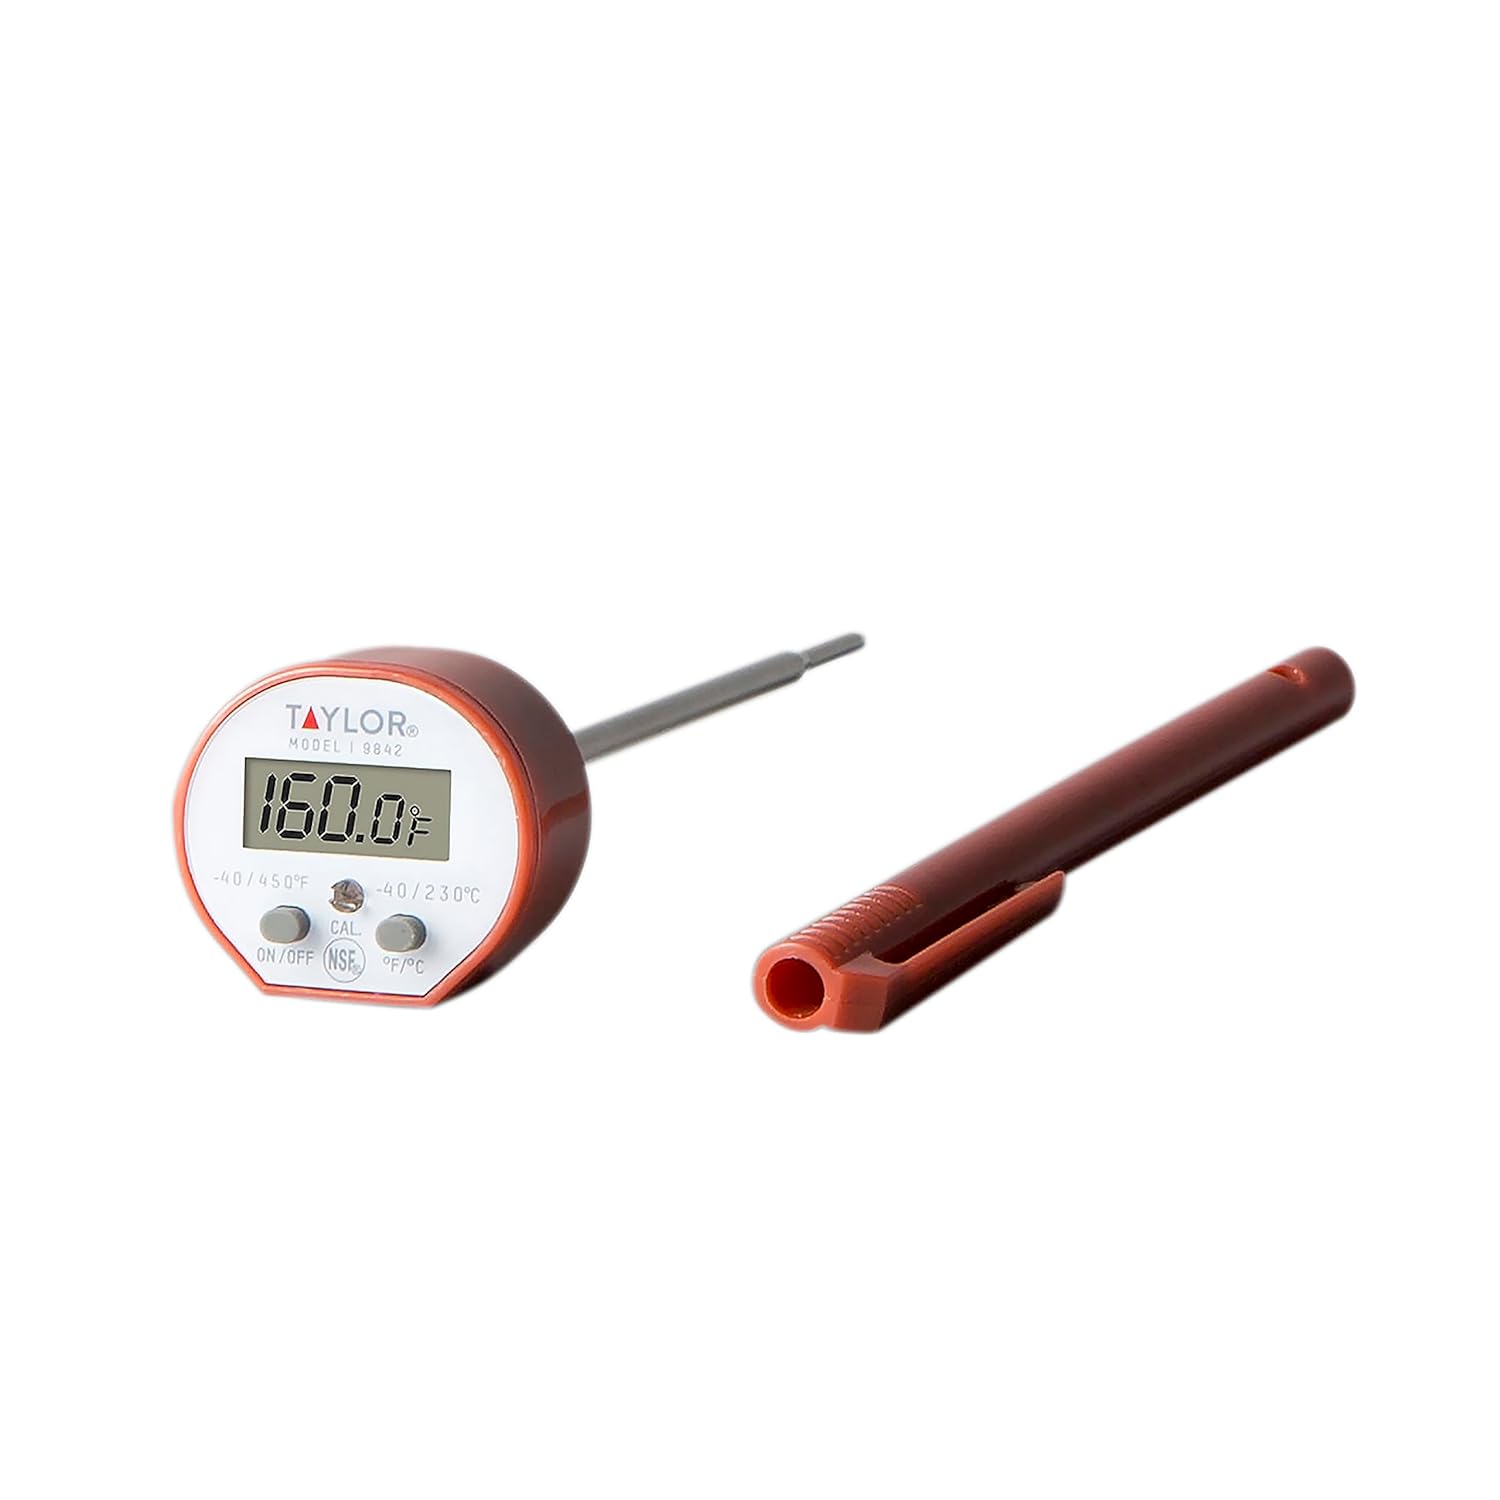 Taylor Waterproof Digital Instant Read Thermometer For Cooking, BBQ, Grilling, Baking, And Meat, Comes With Pocket Sleeve Clip, Red